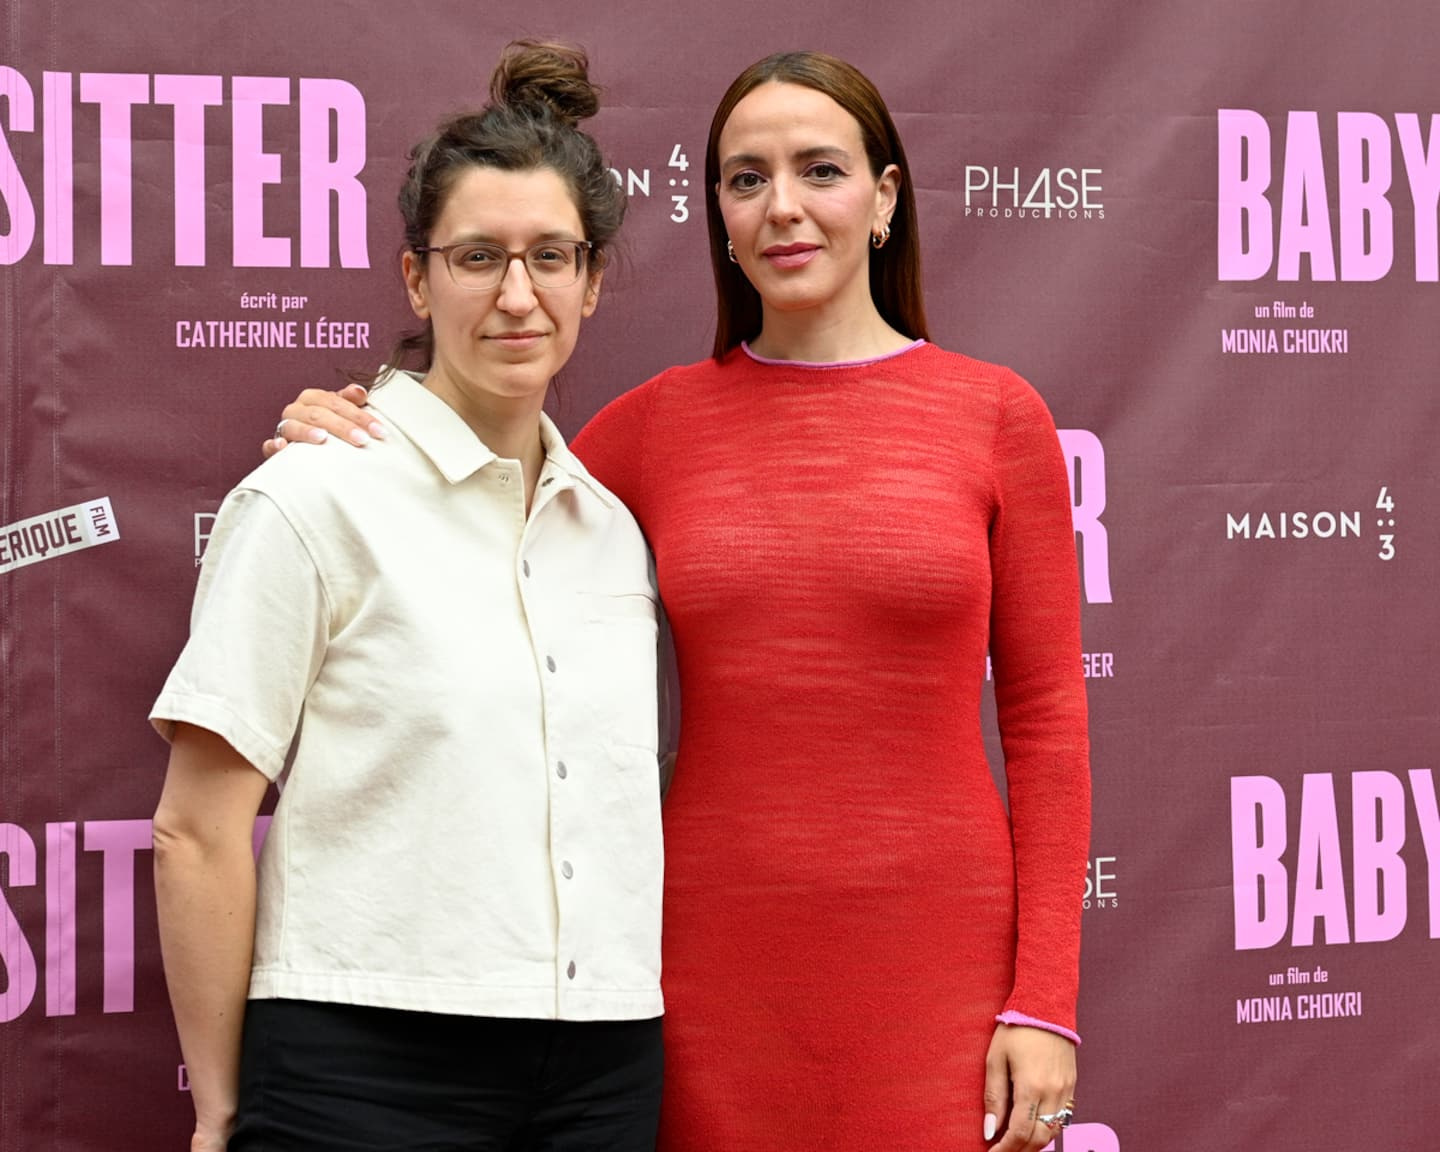 [IN IMAGES] Red carpet for the film "Babysitter"